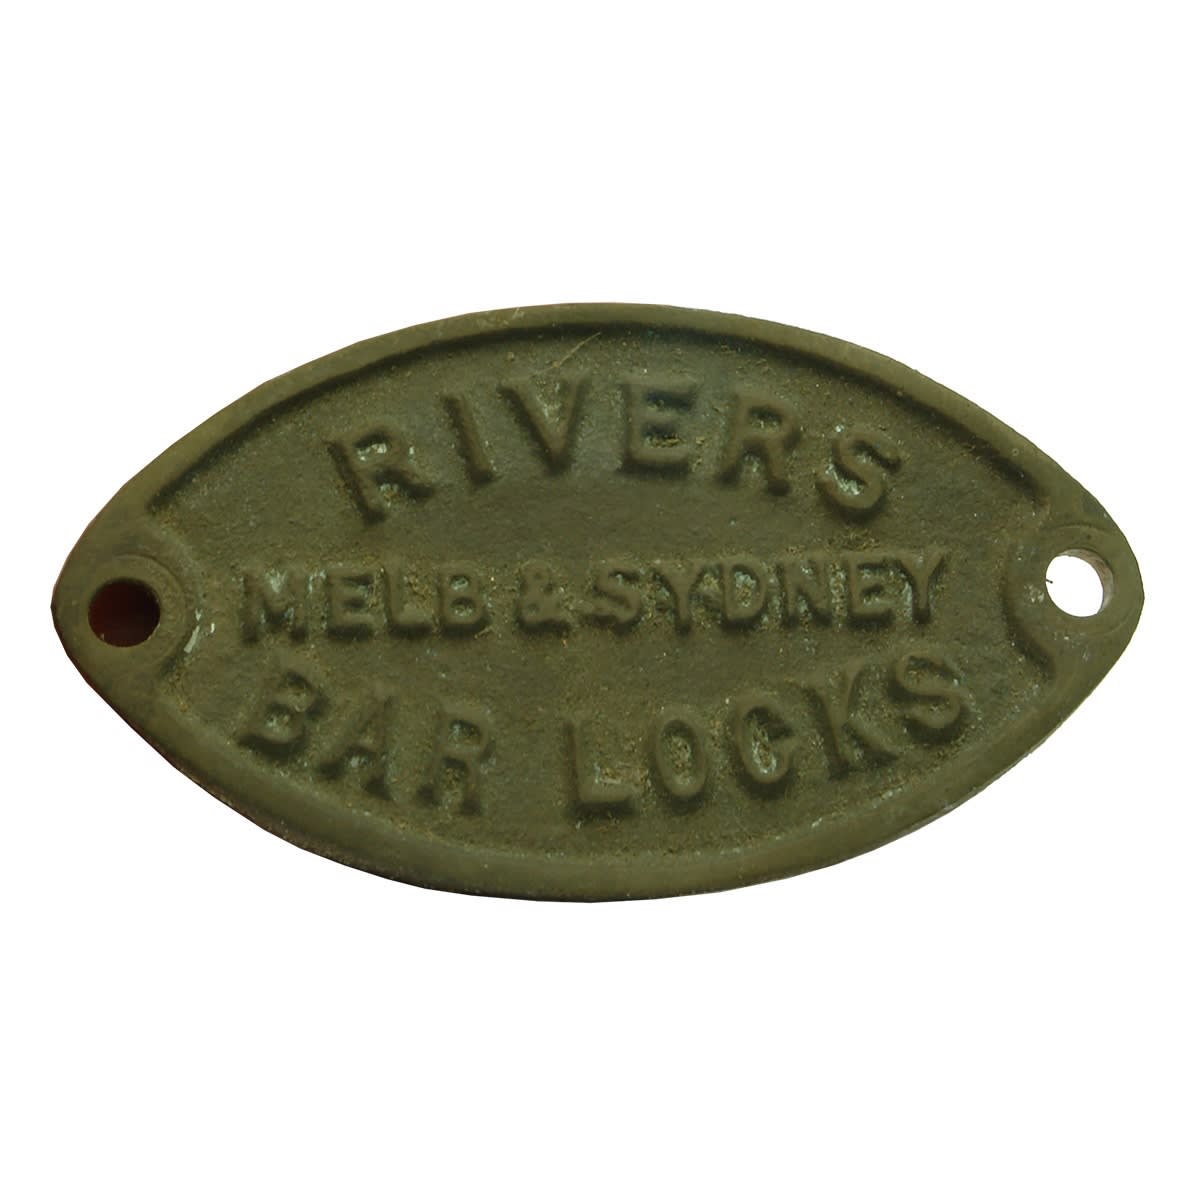 Small brass name plate. Rivers Melb & Sydney Bar Locks. (Victoria & New South Wales)